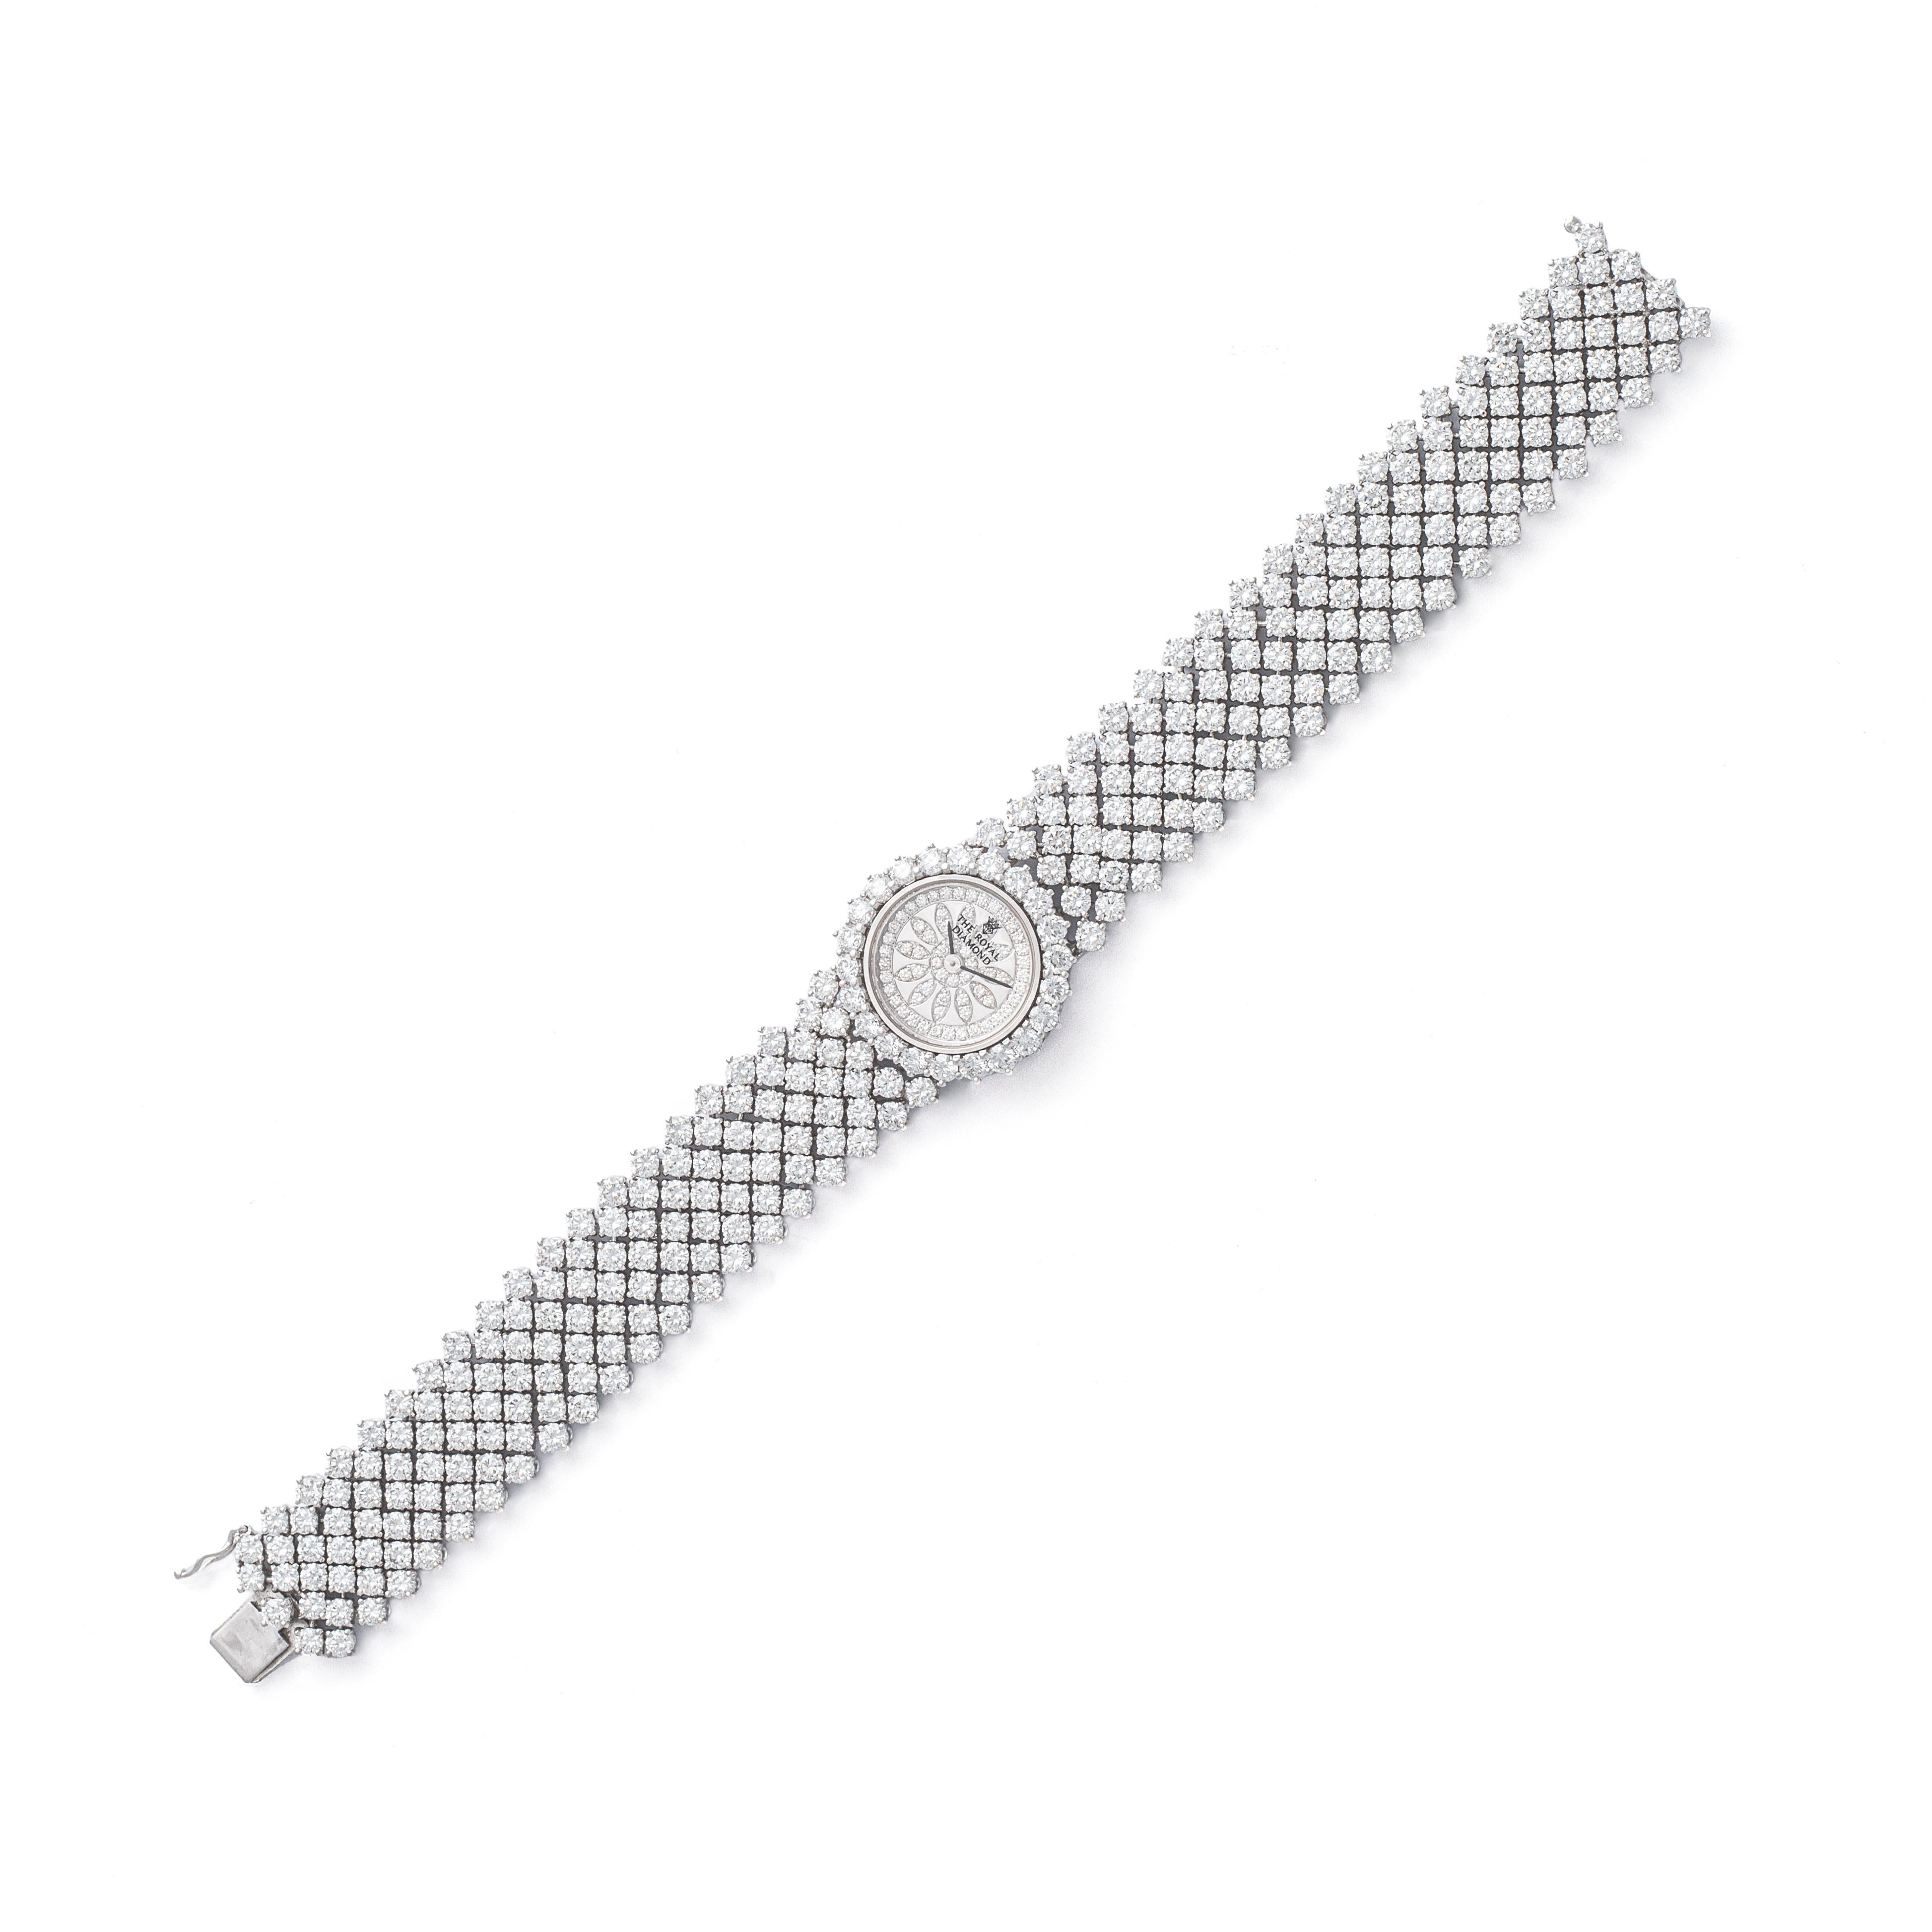 The Royal Diamond Swiss Full Diamond Wristwatch.
Made in SWITZERLAND. Swiss marks.
Numbered BA 321.
361 round cut Diamond, estimated in our opinion total about 21 carats.

Length: 17.50 centimeters.
Width: 1.50 centimeters.

Total weight: 51.70